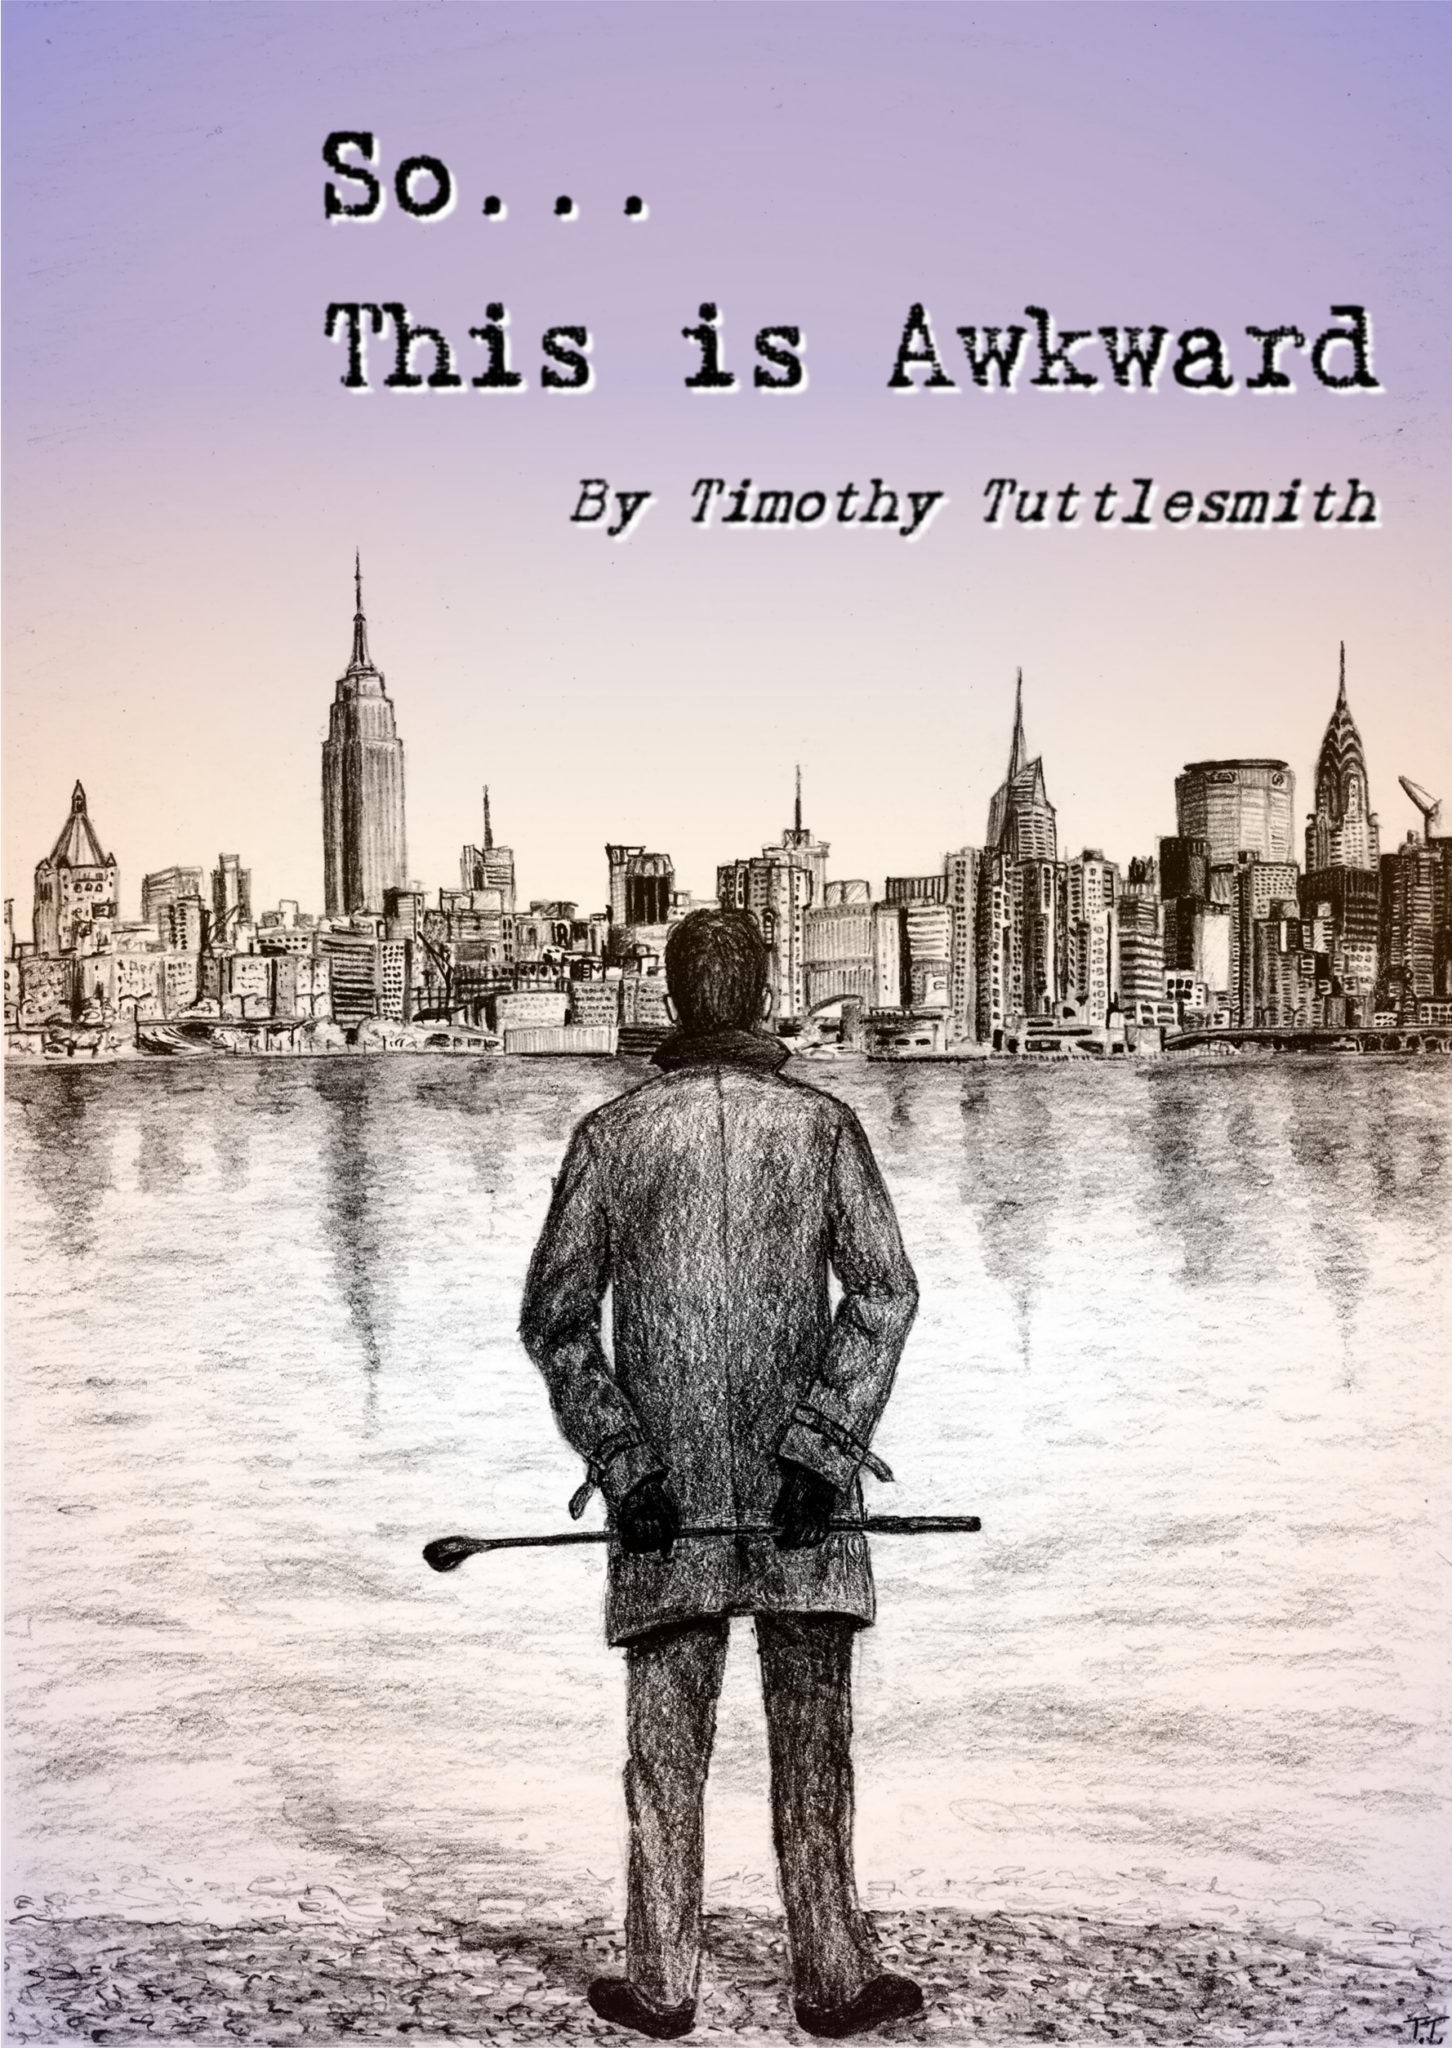 FREE: So… This is Awkward. by Timothy Tuttlesmith